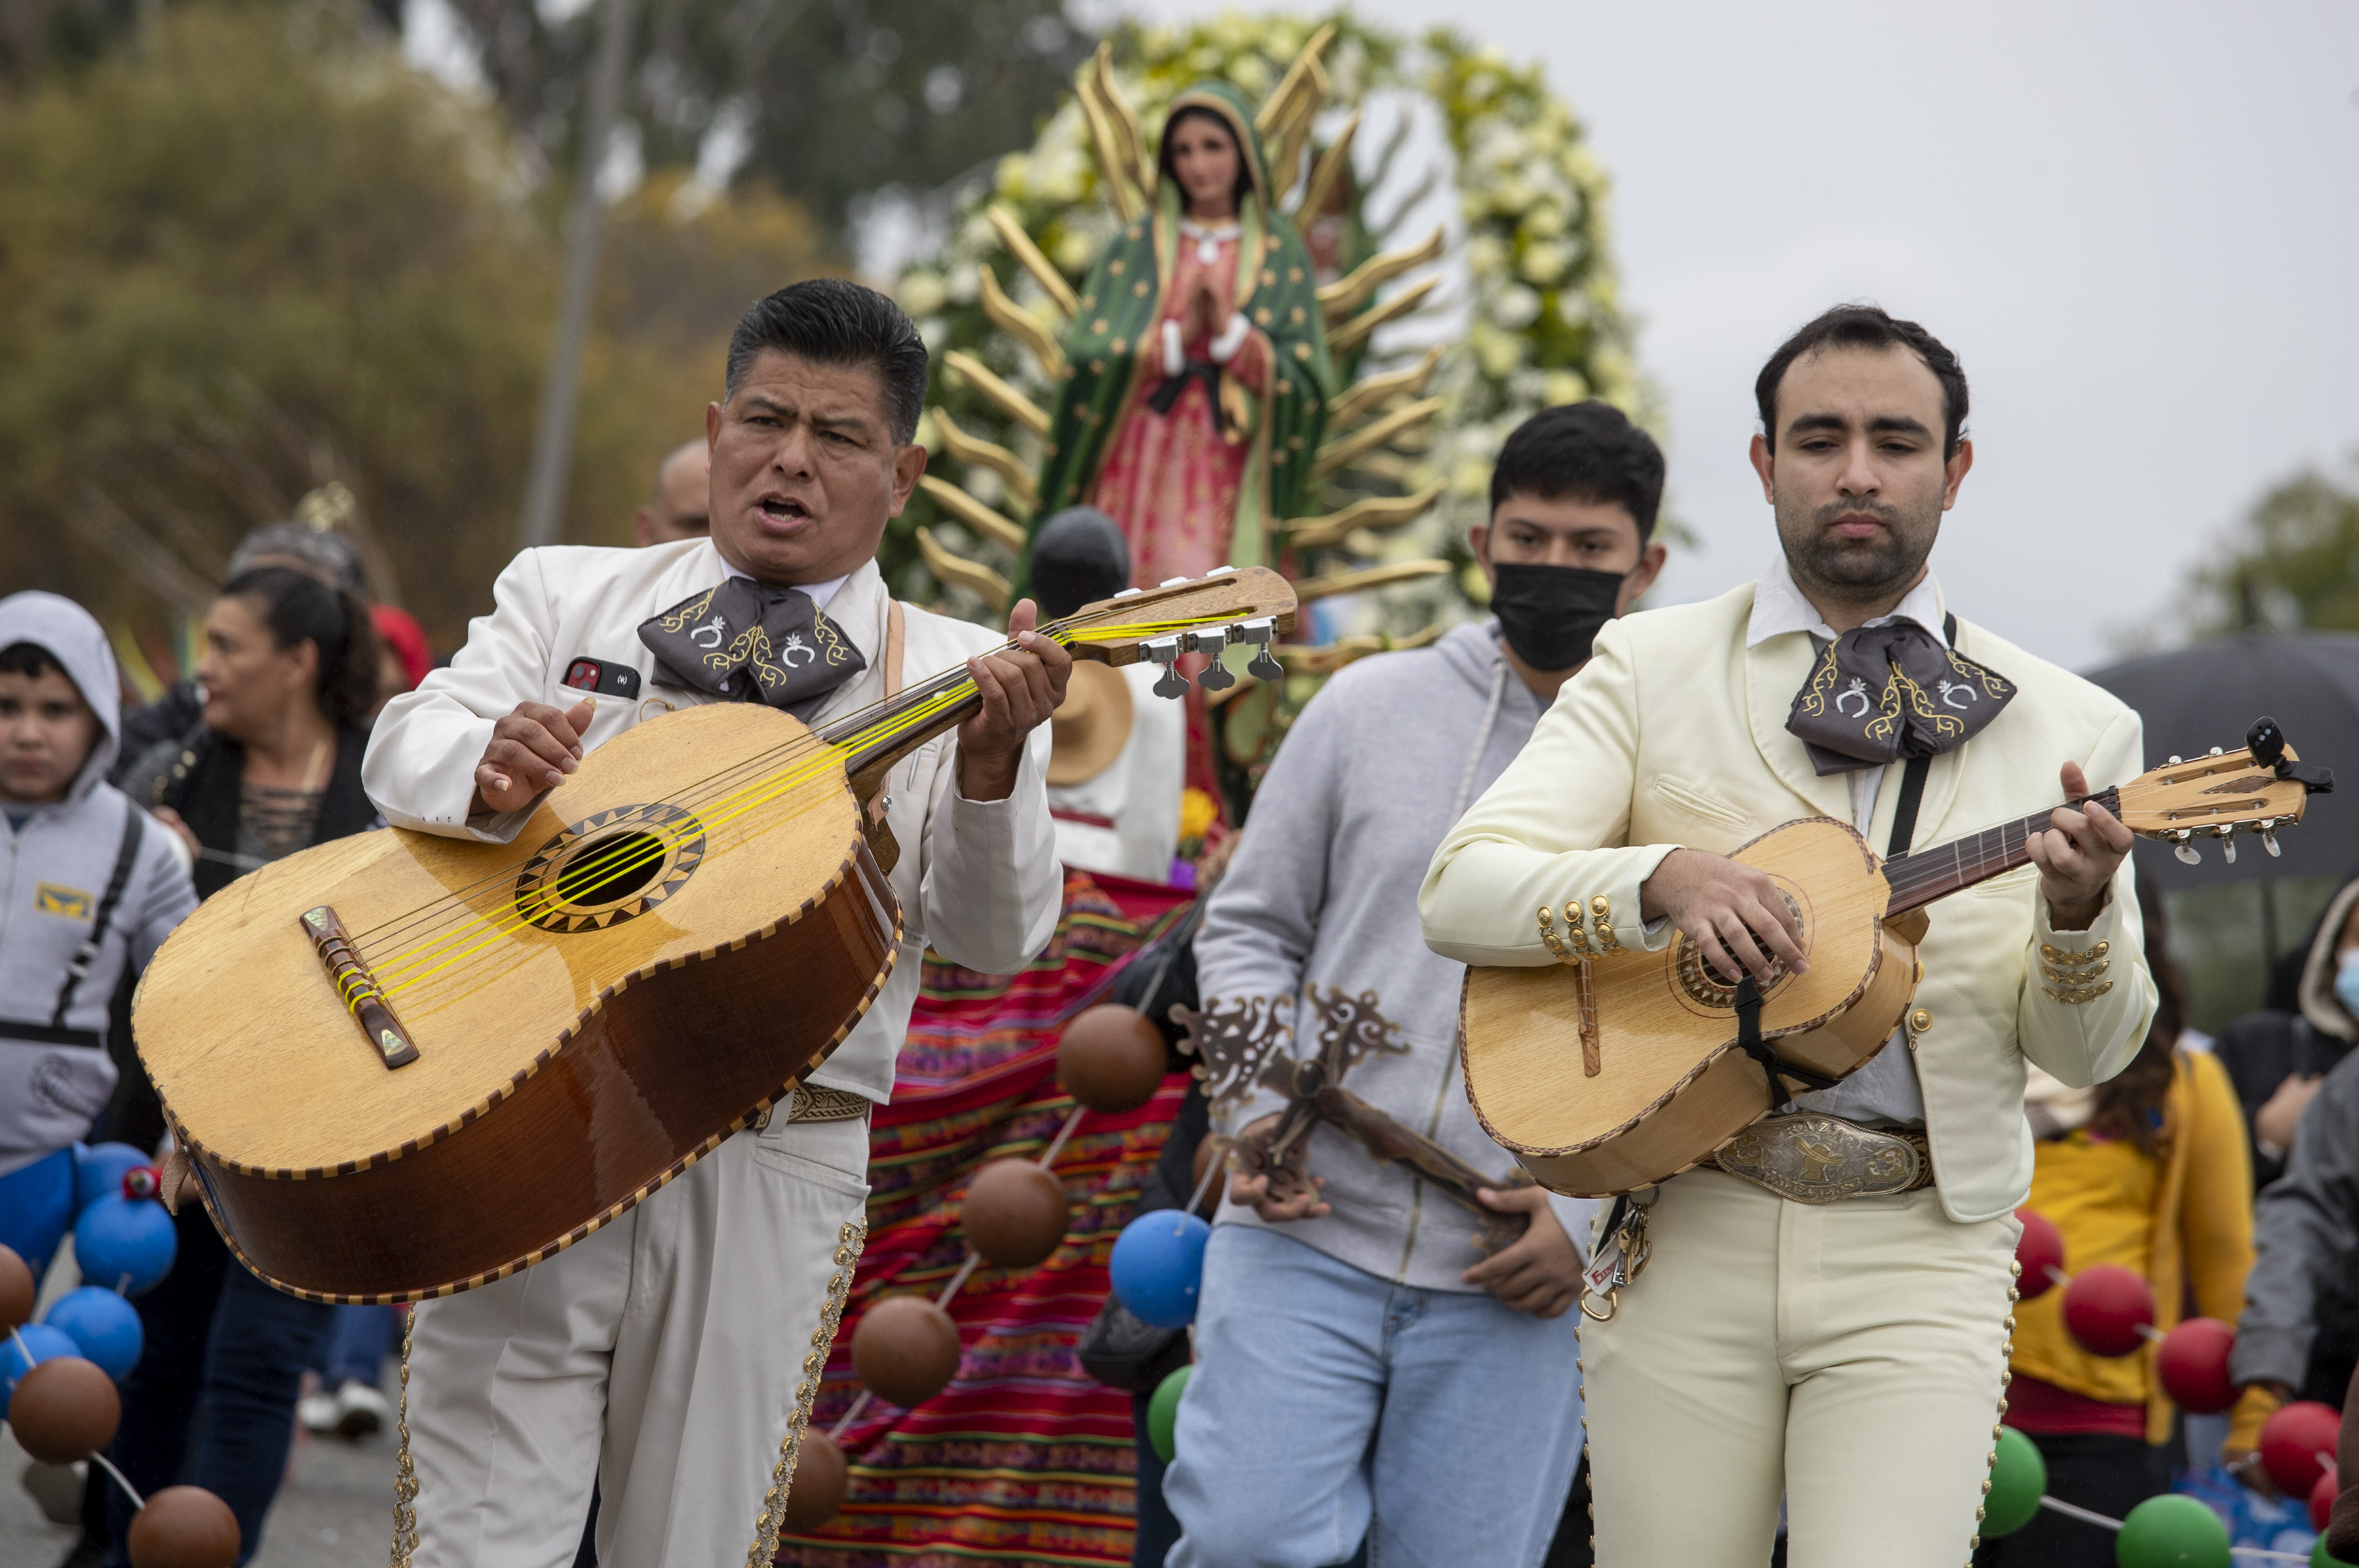 East Los Angeles devotees go with simpler, and less costly, Virgen de Guadalupe displays.